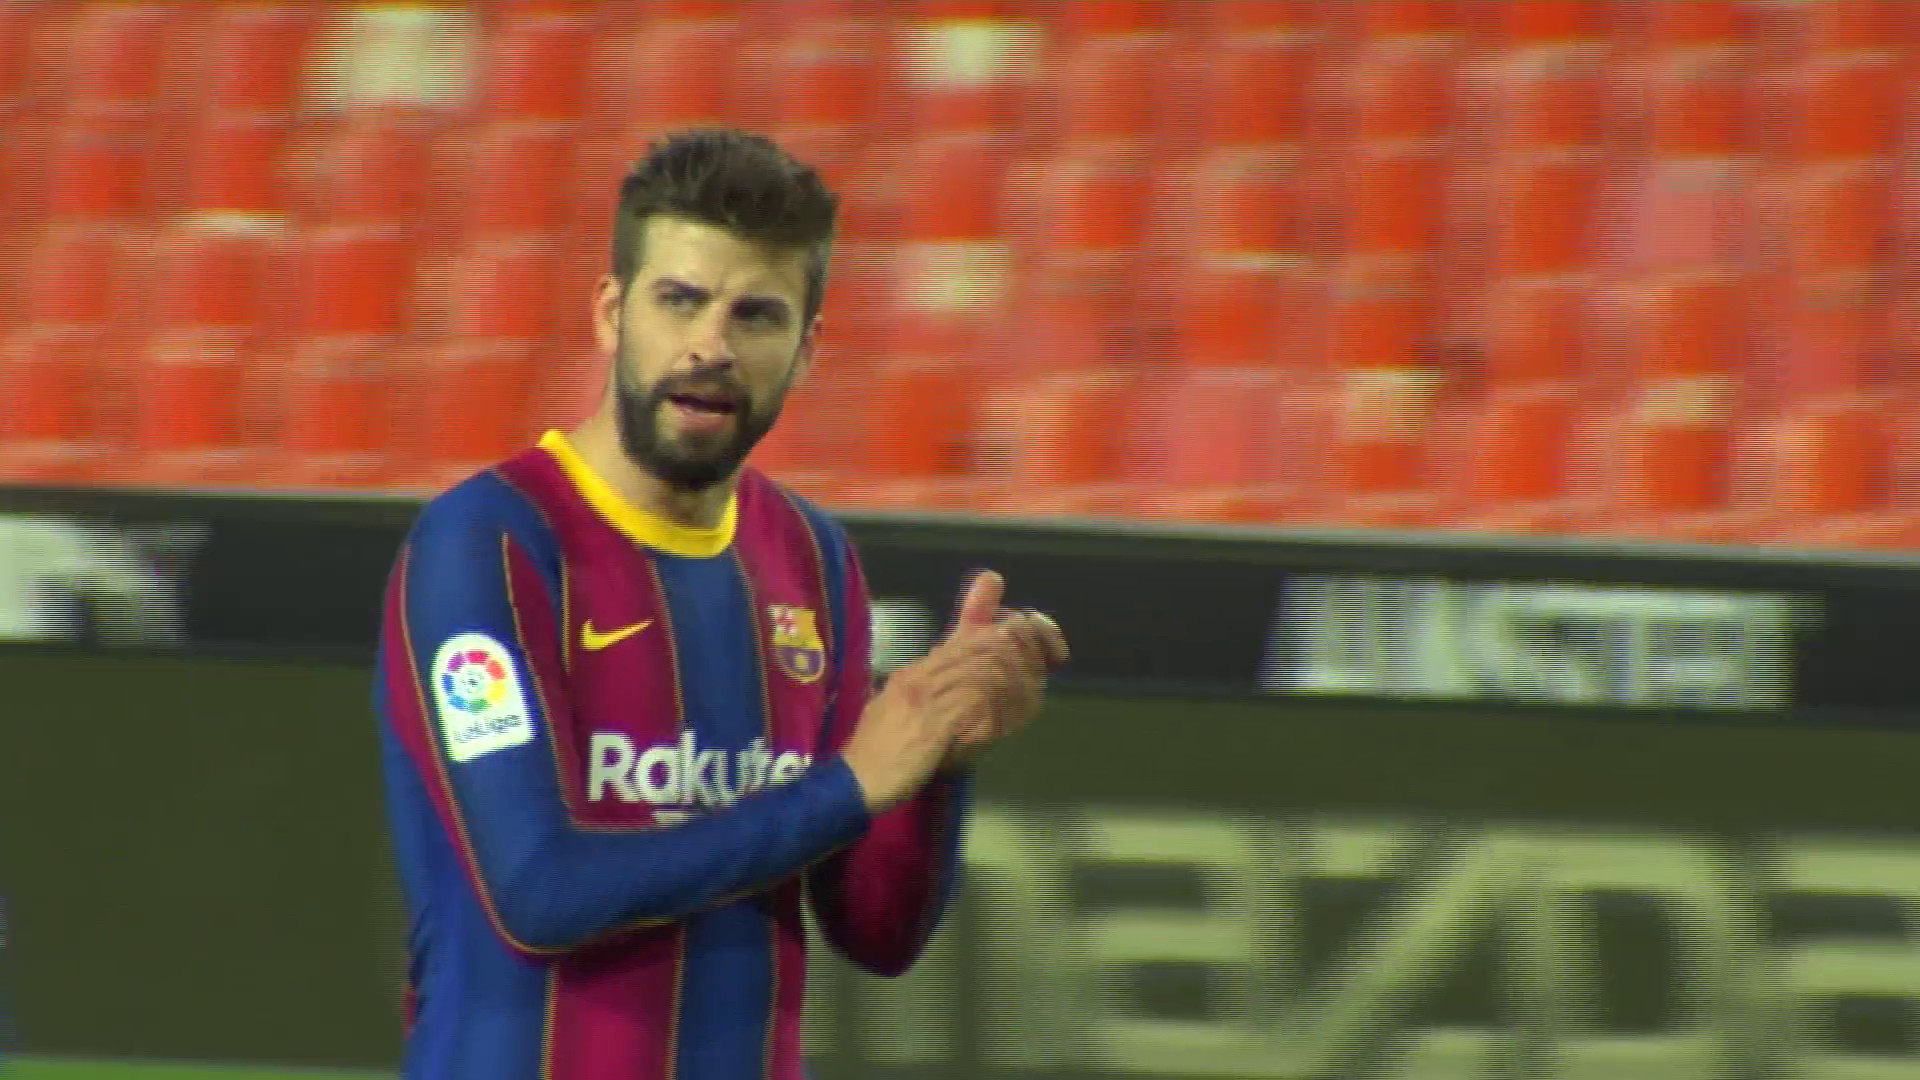 PitchCam - Pique leads from the back at Mestalla